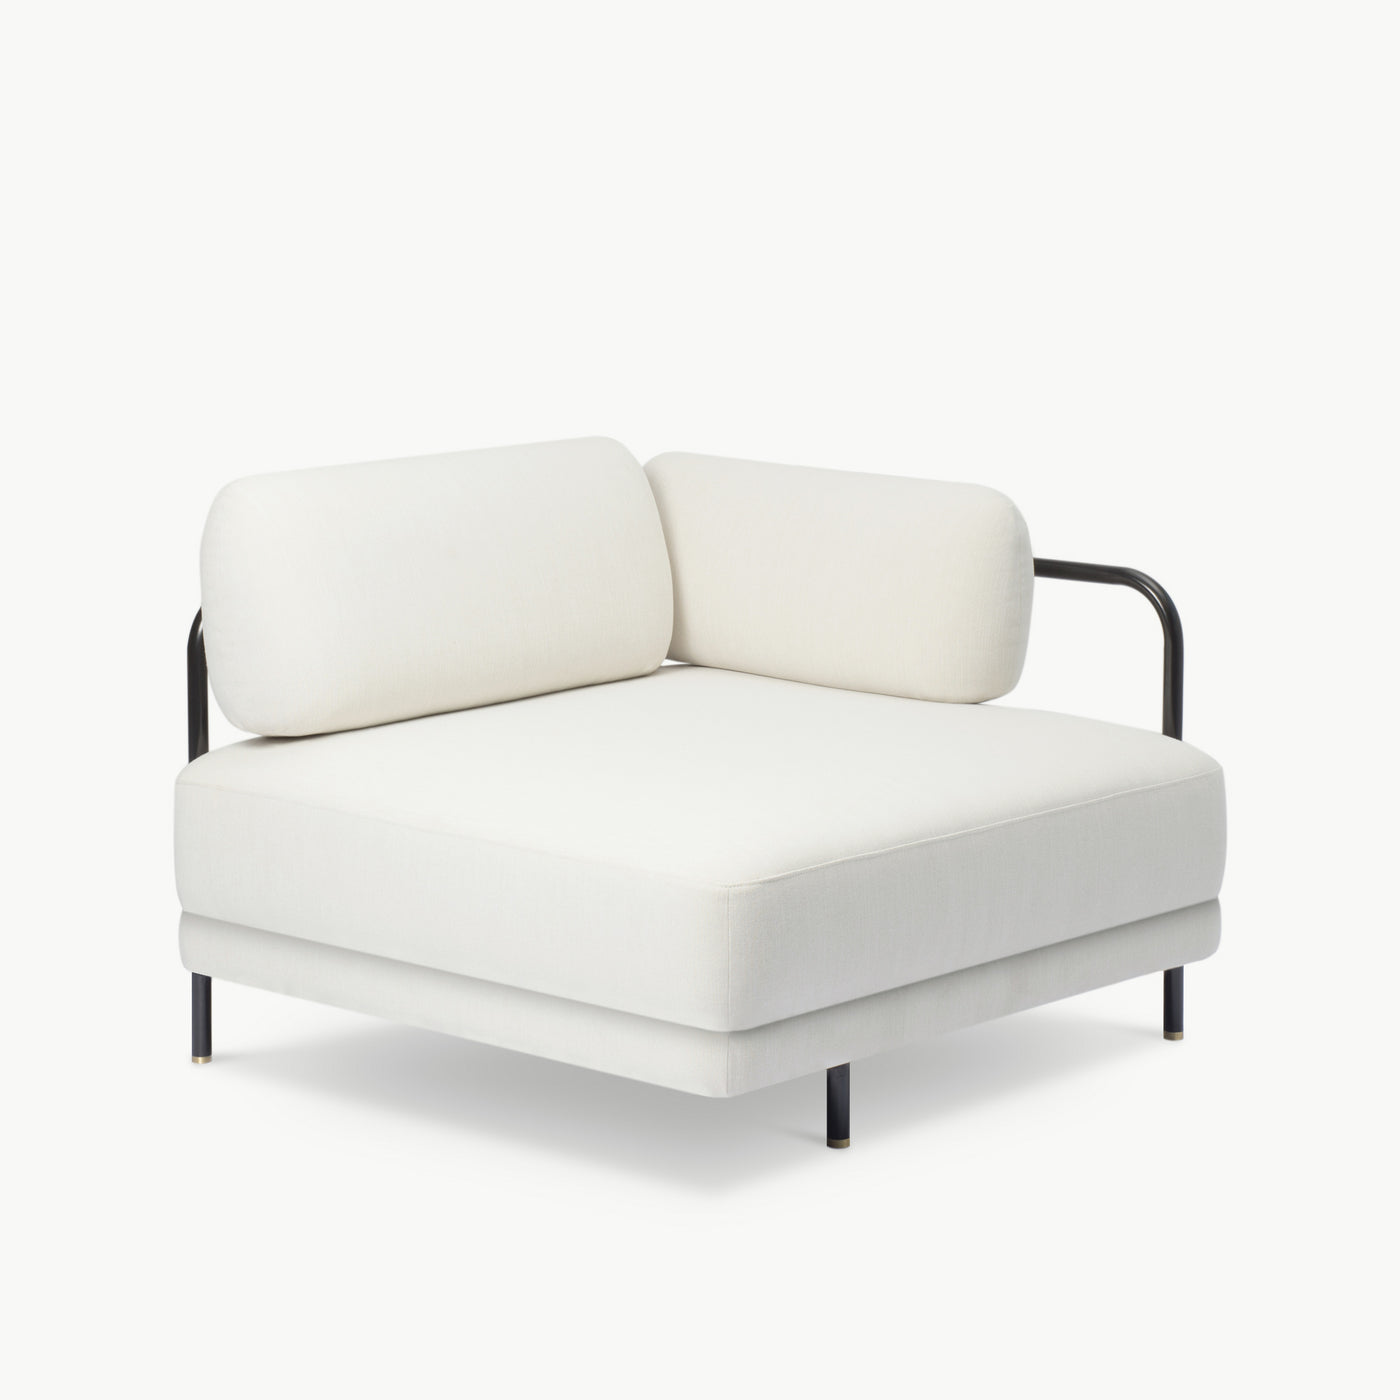 ALEX Lounge Chair - Left in Fabric (Ivory)